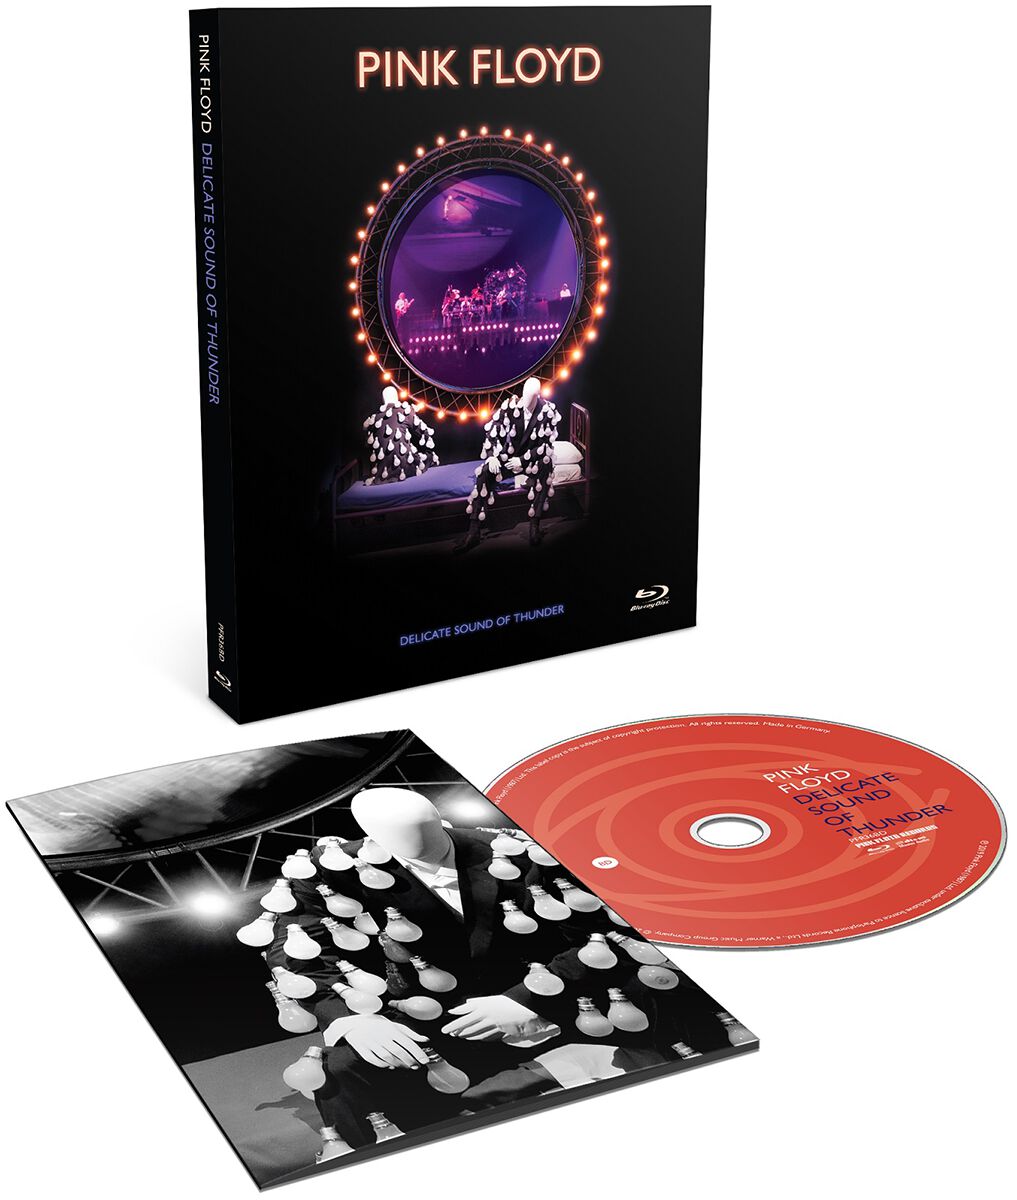 Pink Floyd Delicate sound of thunder Blu-Ray multicolor von Pink Floyd